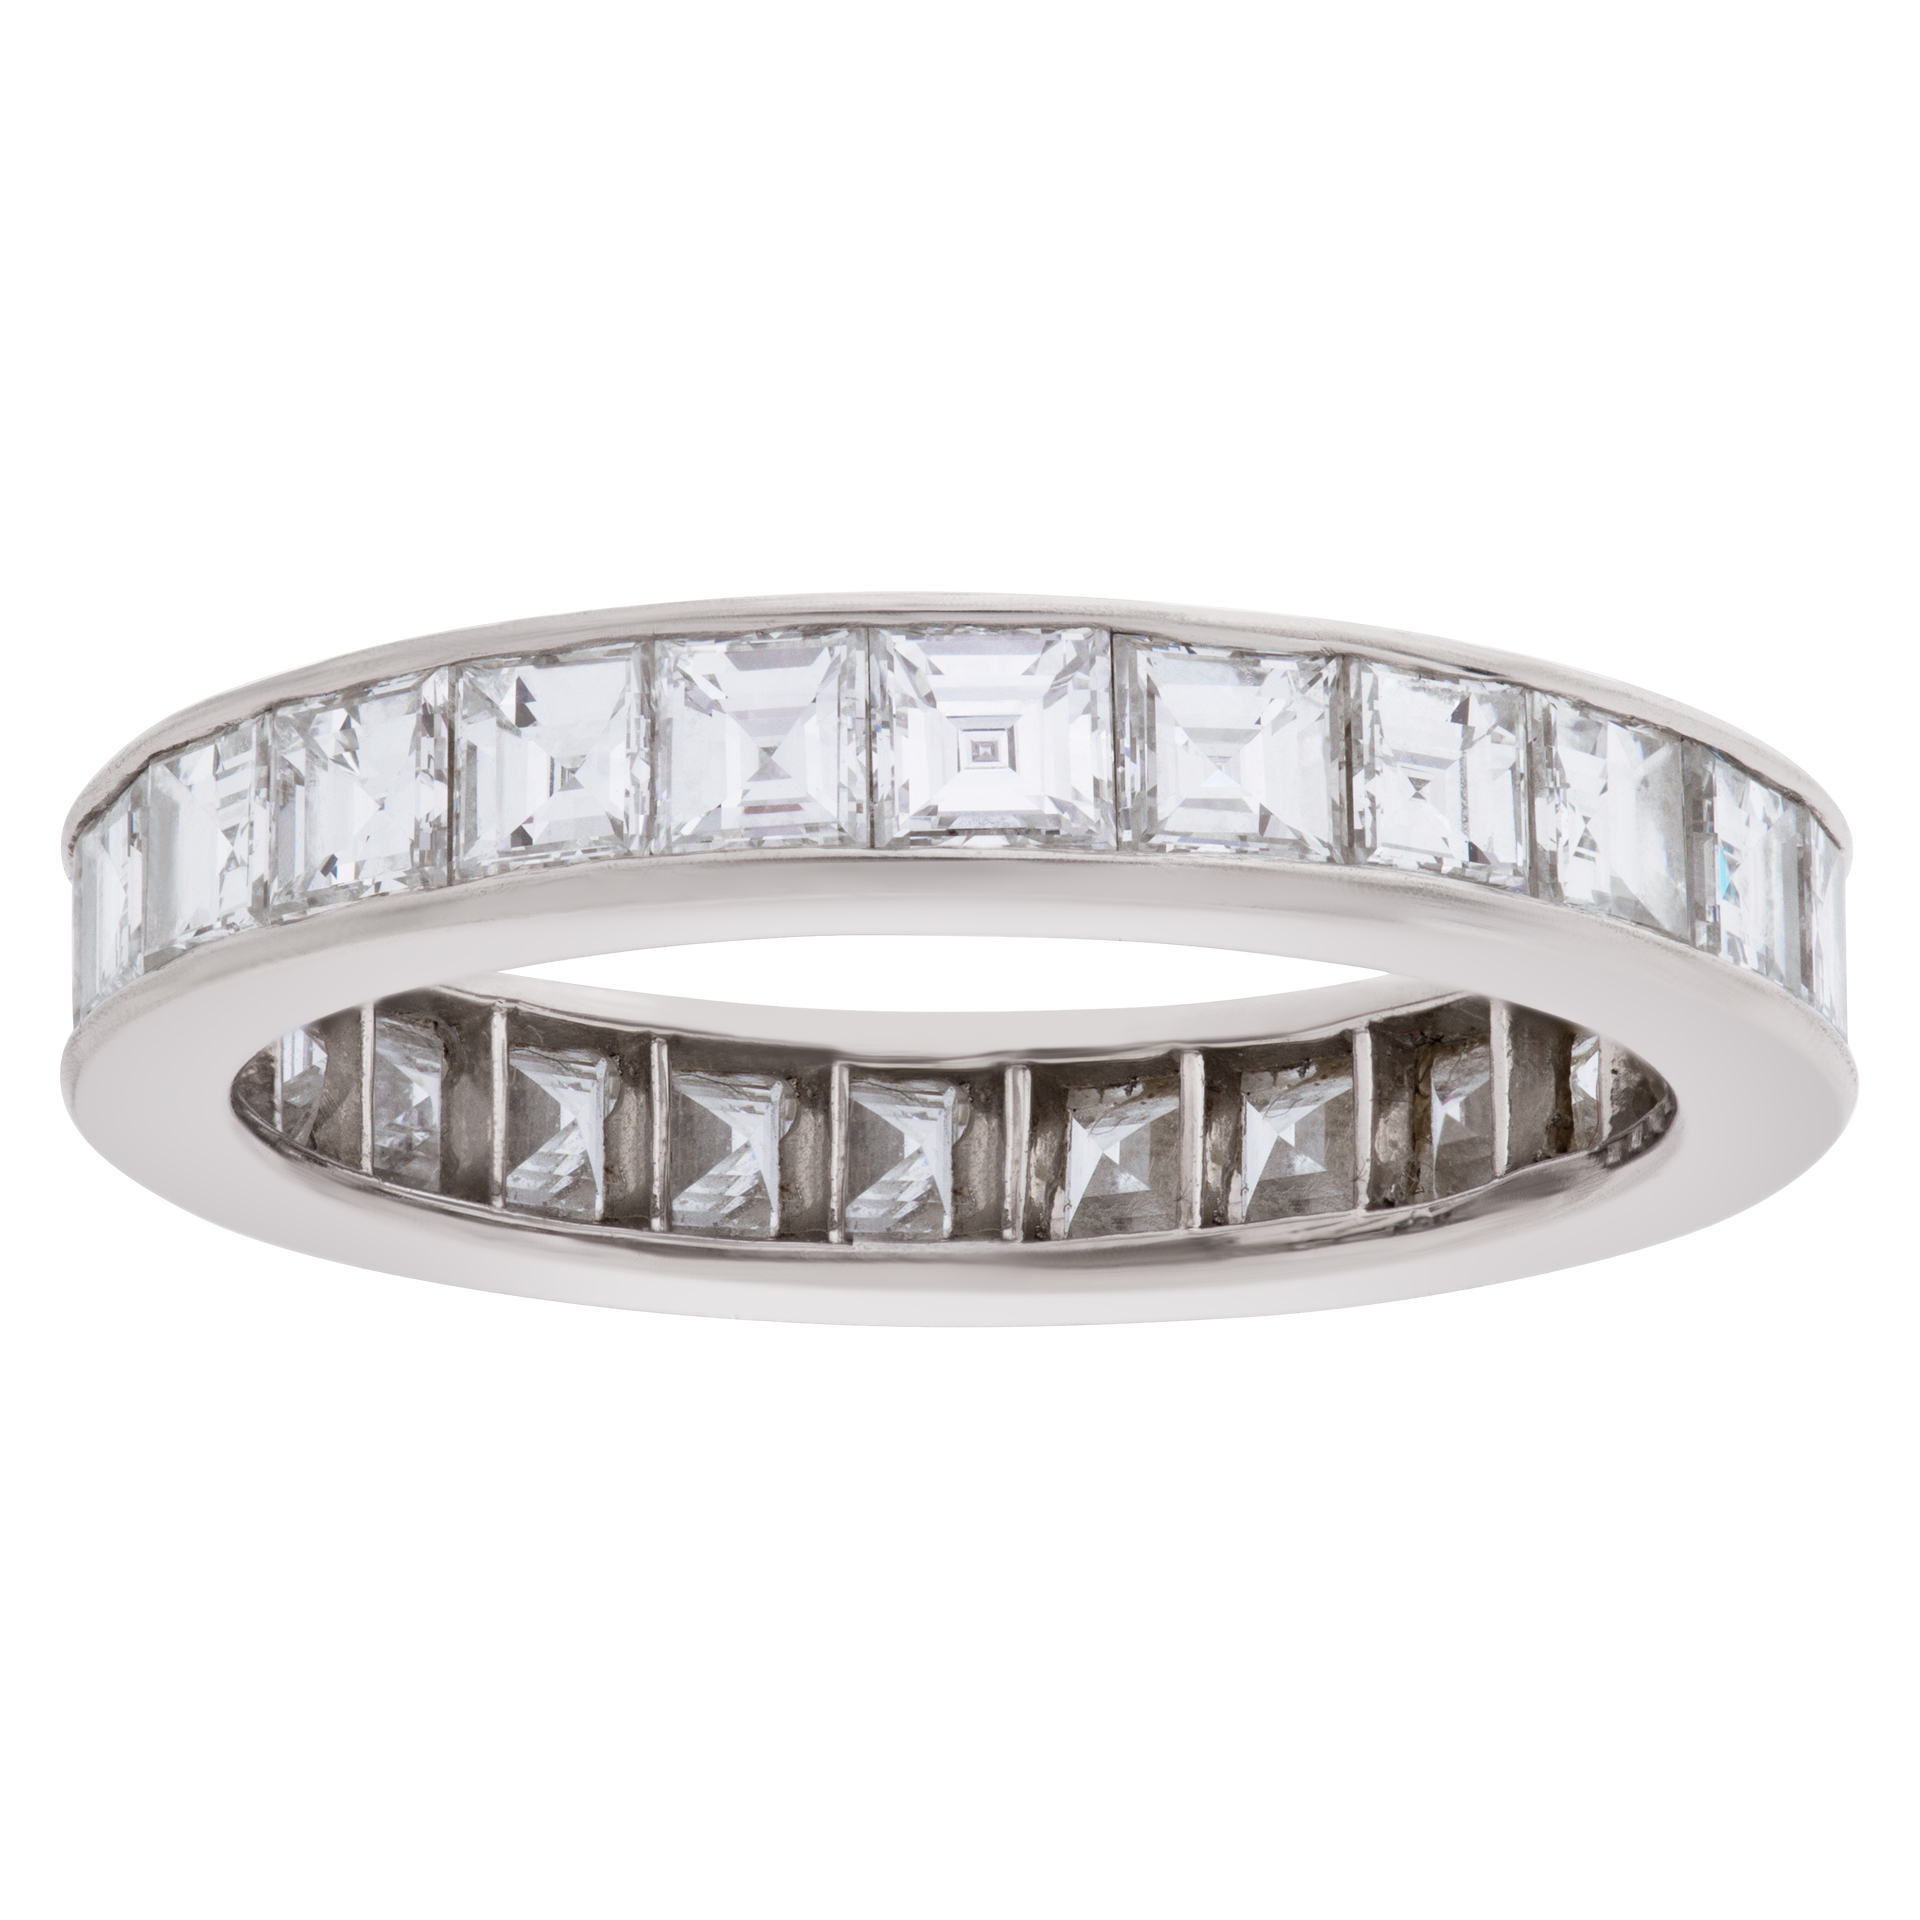 Platinum eternity band with approximately 3.12 carats in diamonds